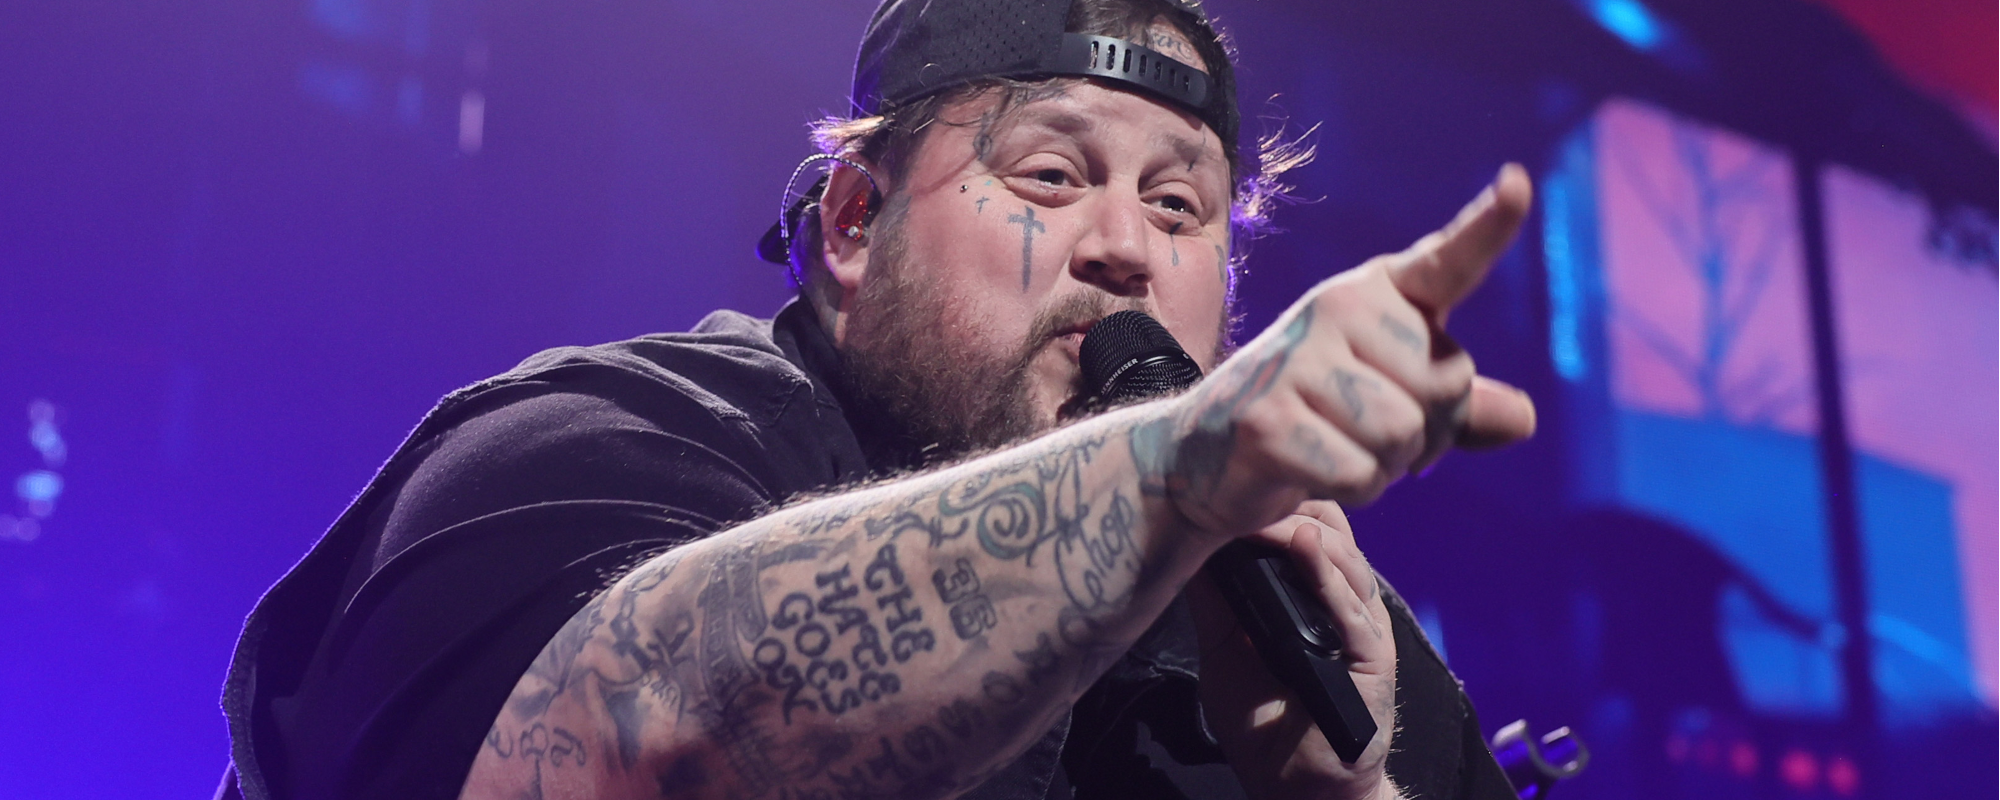 Jelly Roll Keeps It Real About Past Drug Struggles: “I Had To Learn That You Could Drink Alcohol Without Doing Cocaine”